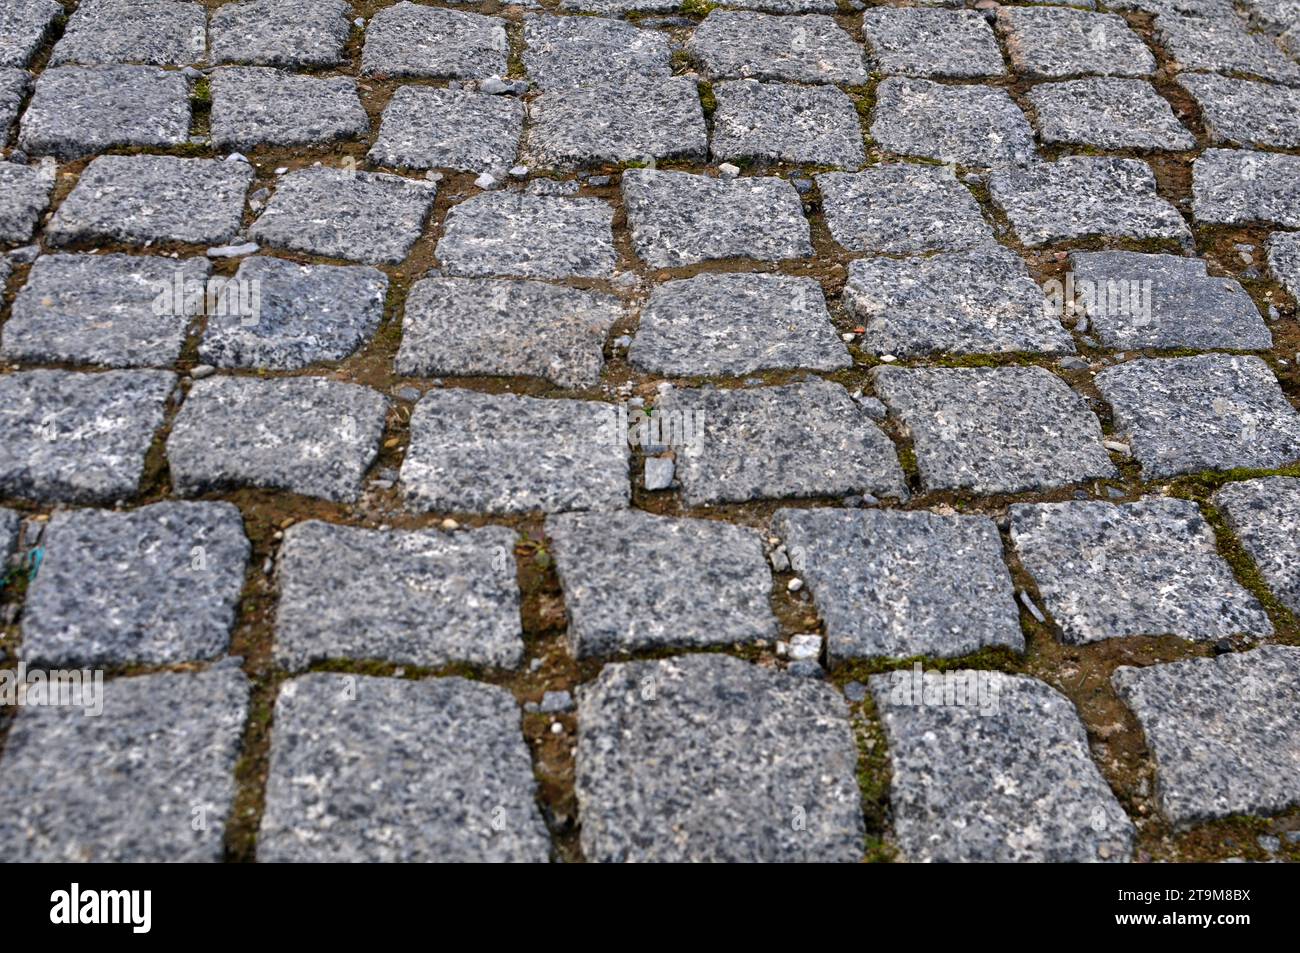 Old stone cobblestones from which the road is paved Stock Photo